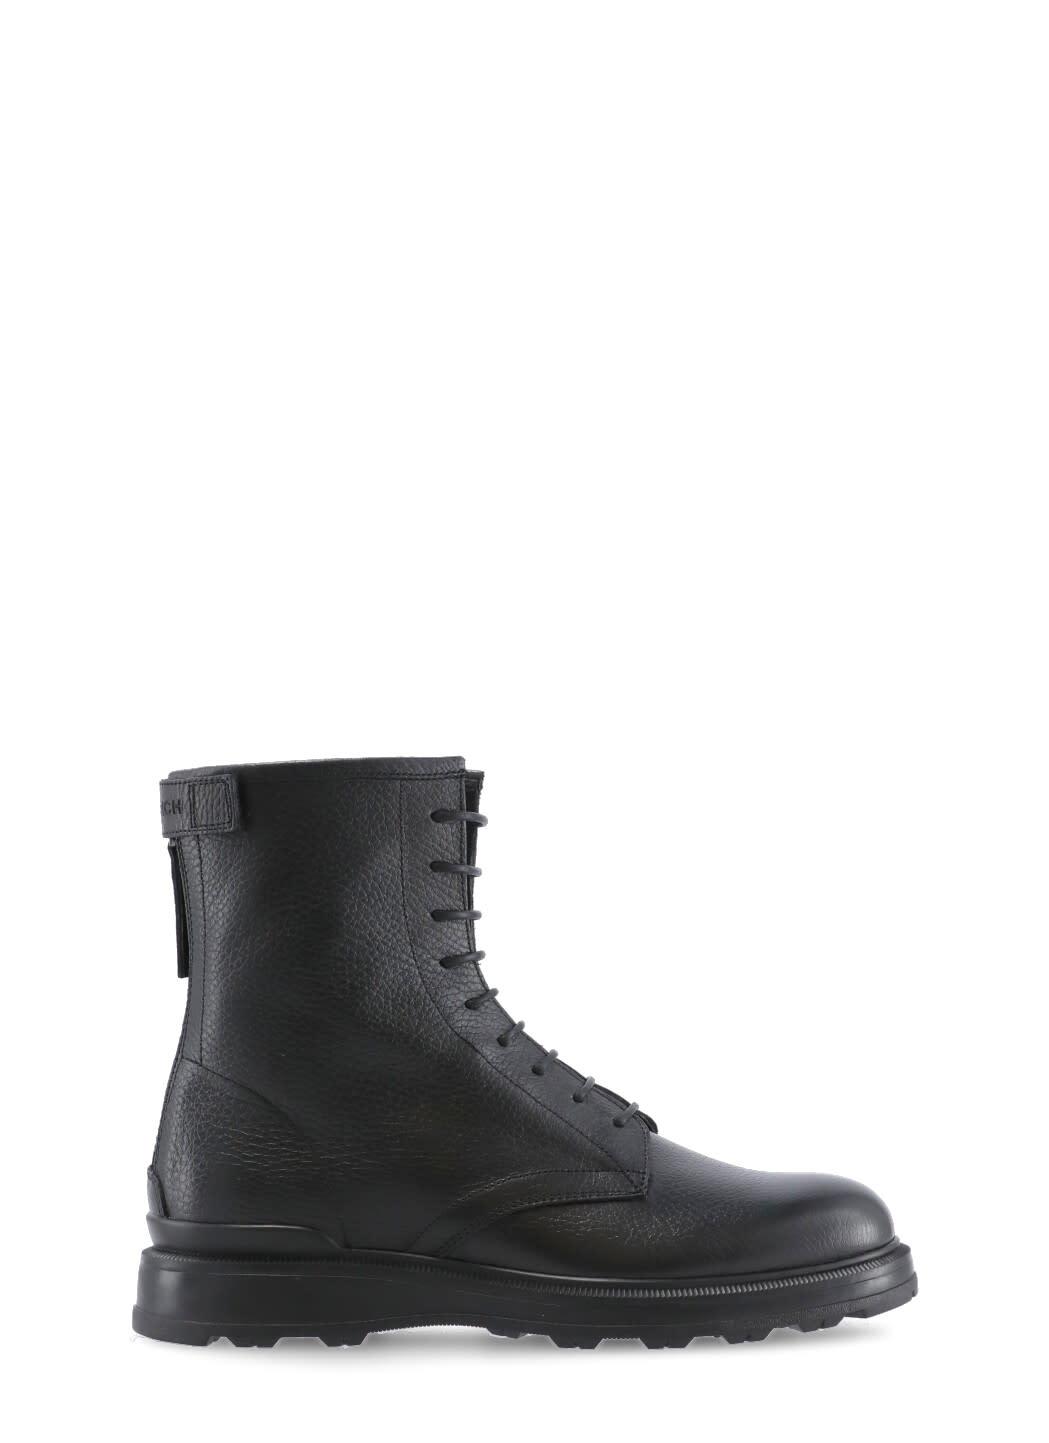 Woolrich Work Army Boots in Black | Lyst